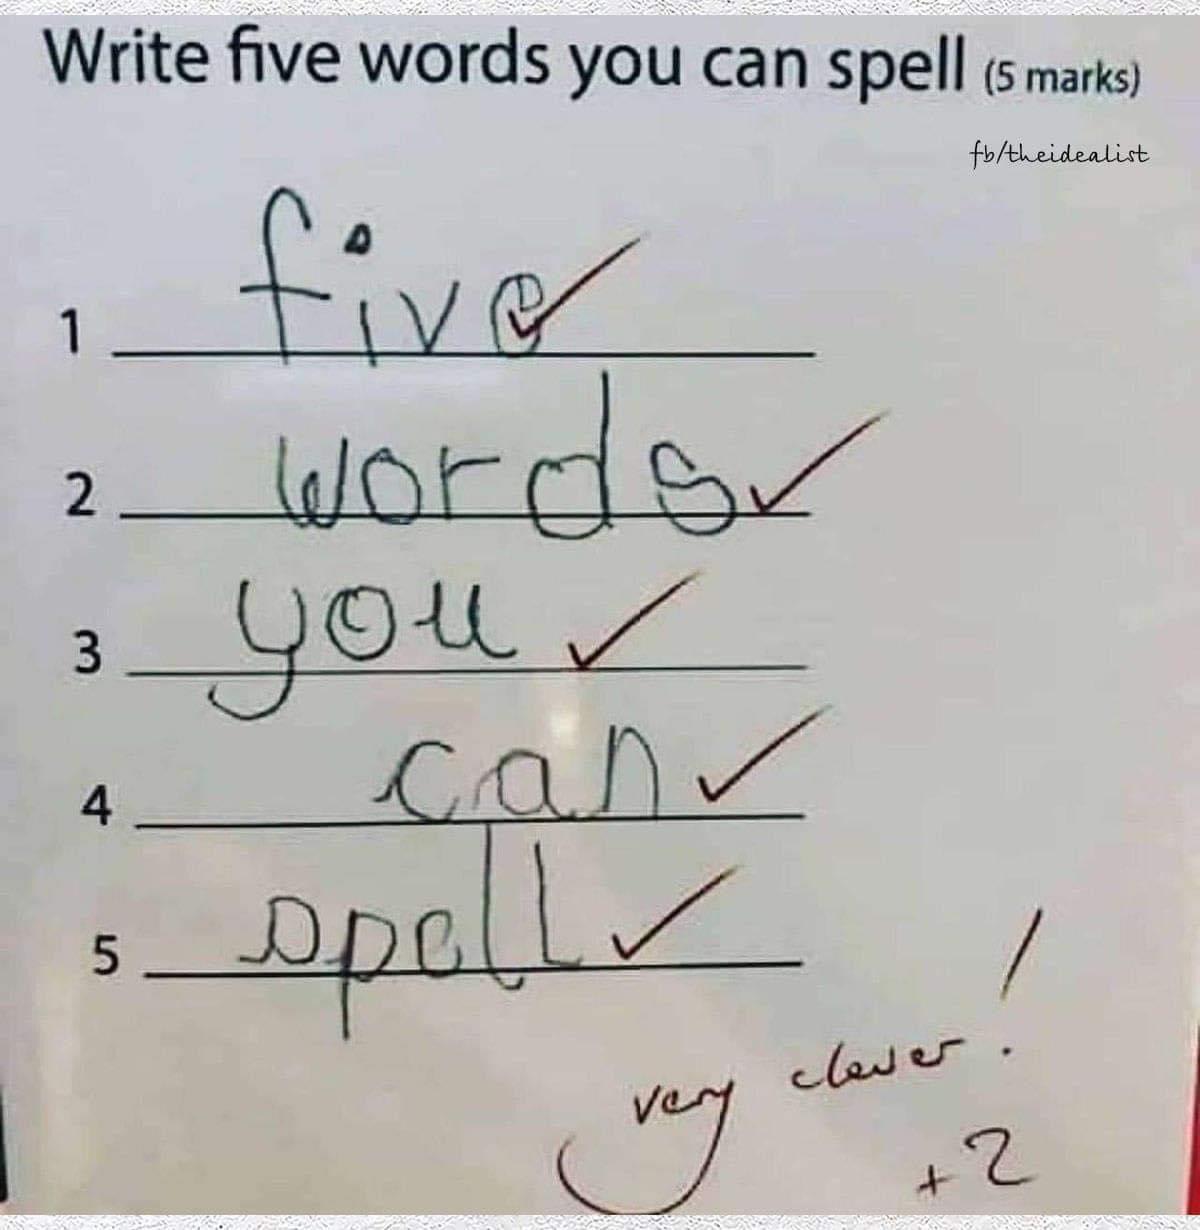 To test a child’s spelling ability!